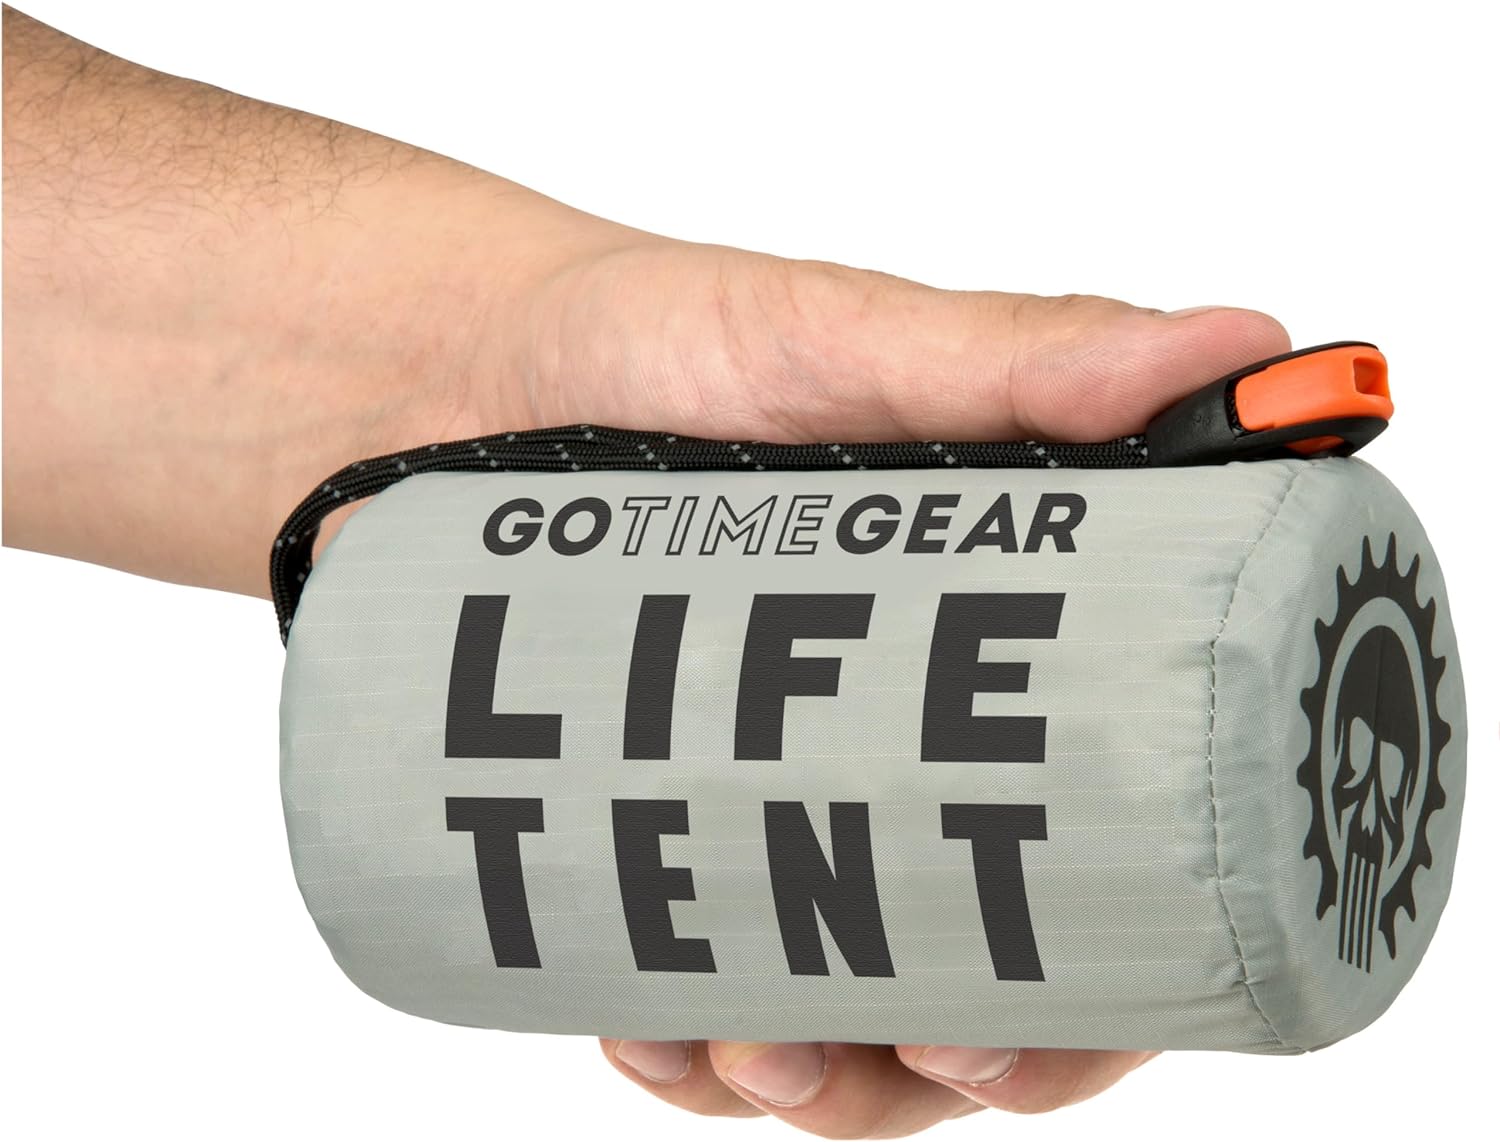 Go Time Gear Life Tent Emergency Survival Shelter – 2 Person Emergency Tent – Use As Survival Tent, Emergency Shelter, Tube Tent, Survival Tarp, Includes Survival Whistle & Paracord - Snow Camo 1 Pack